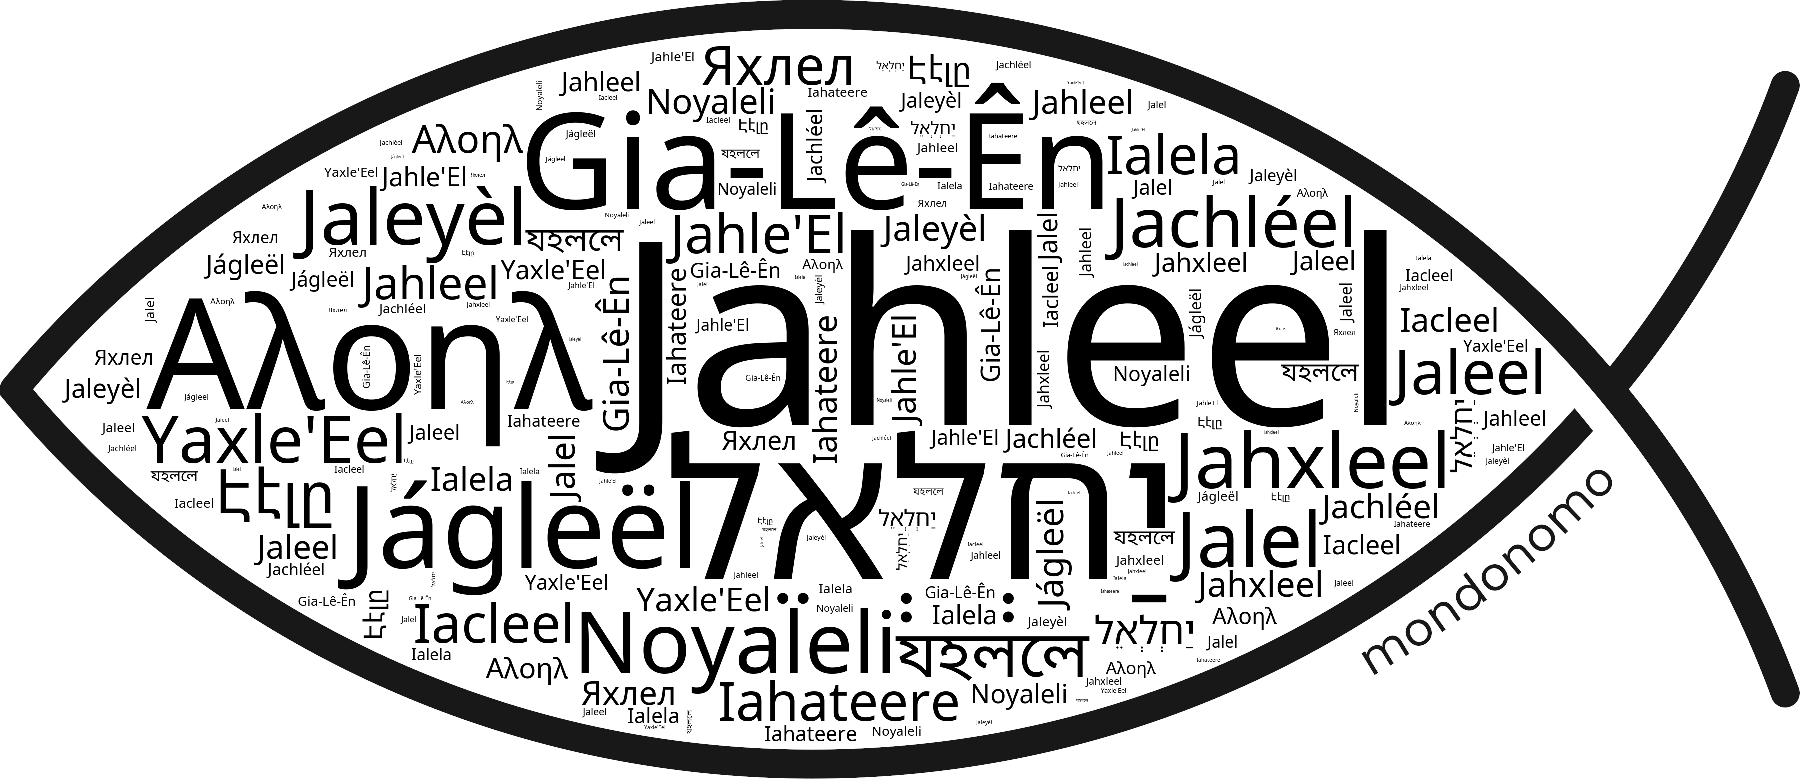 Name Jahleel in the world's Bibles